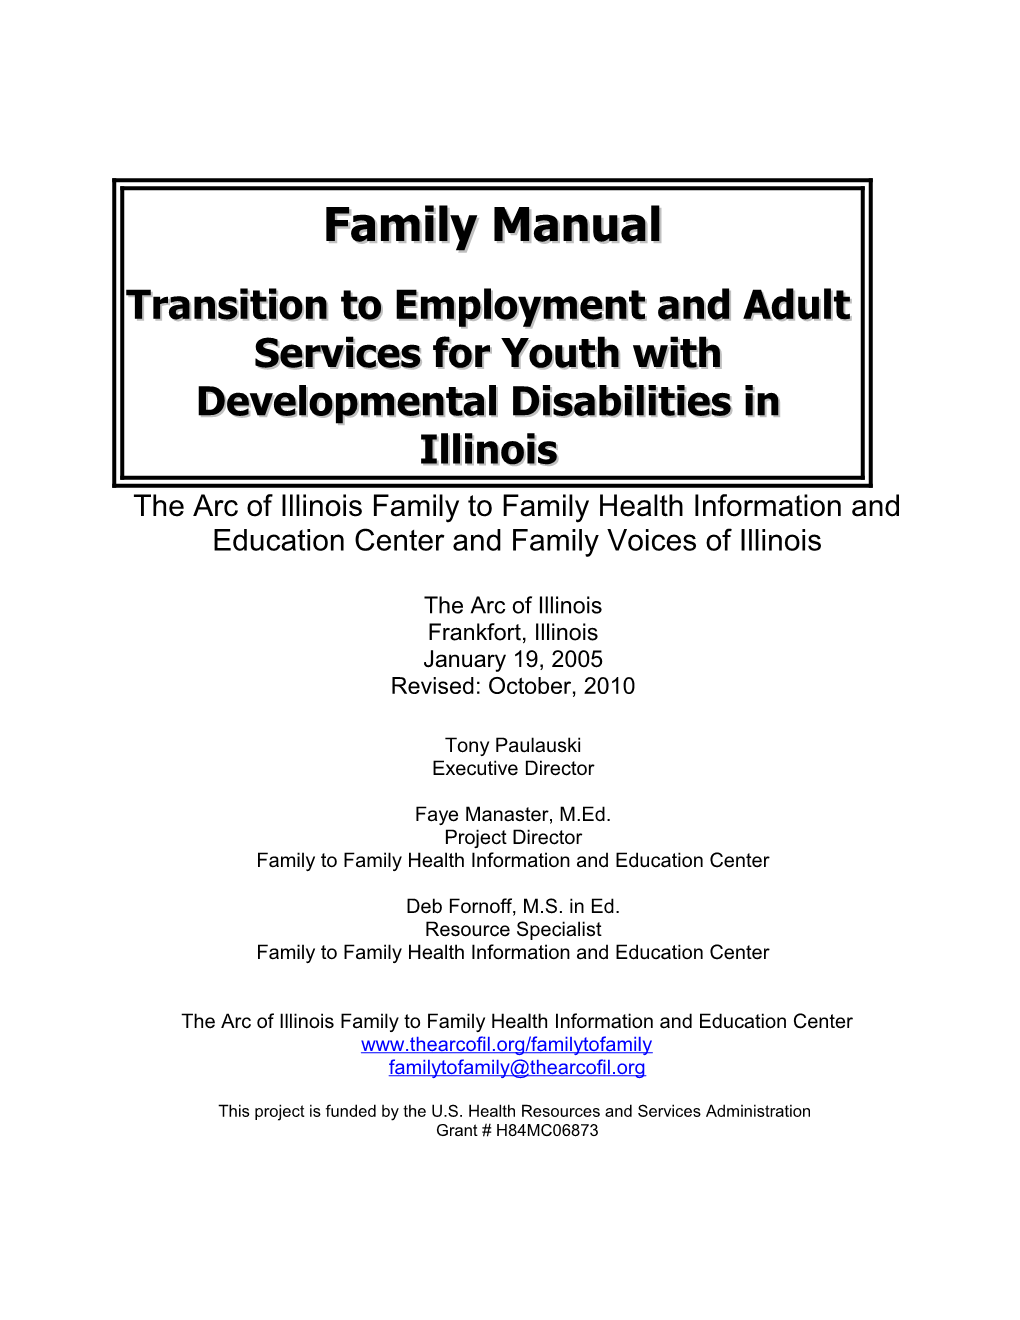 The Arc of Illinois Family to Family Health Information and Educationcenter and Family